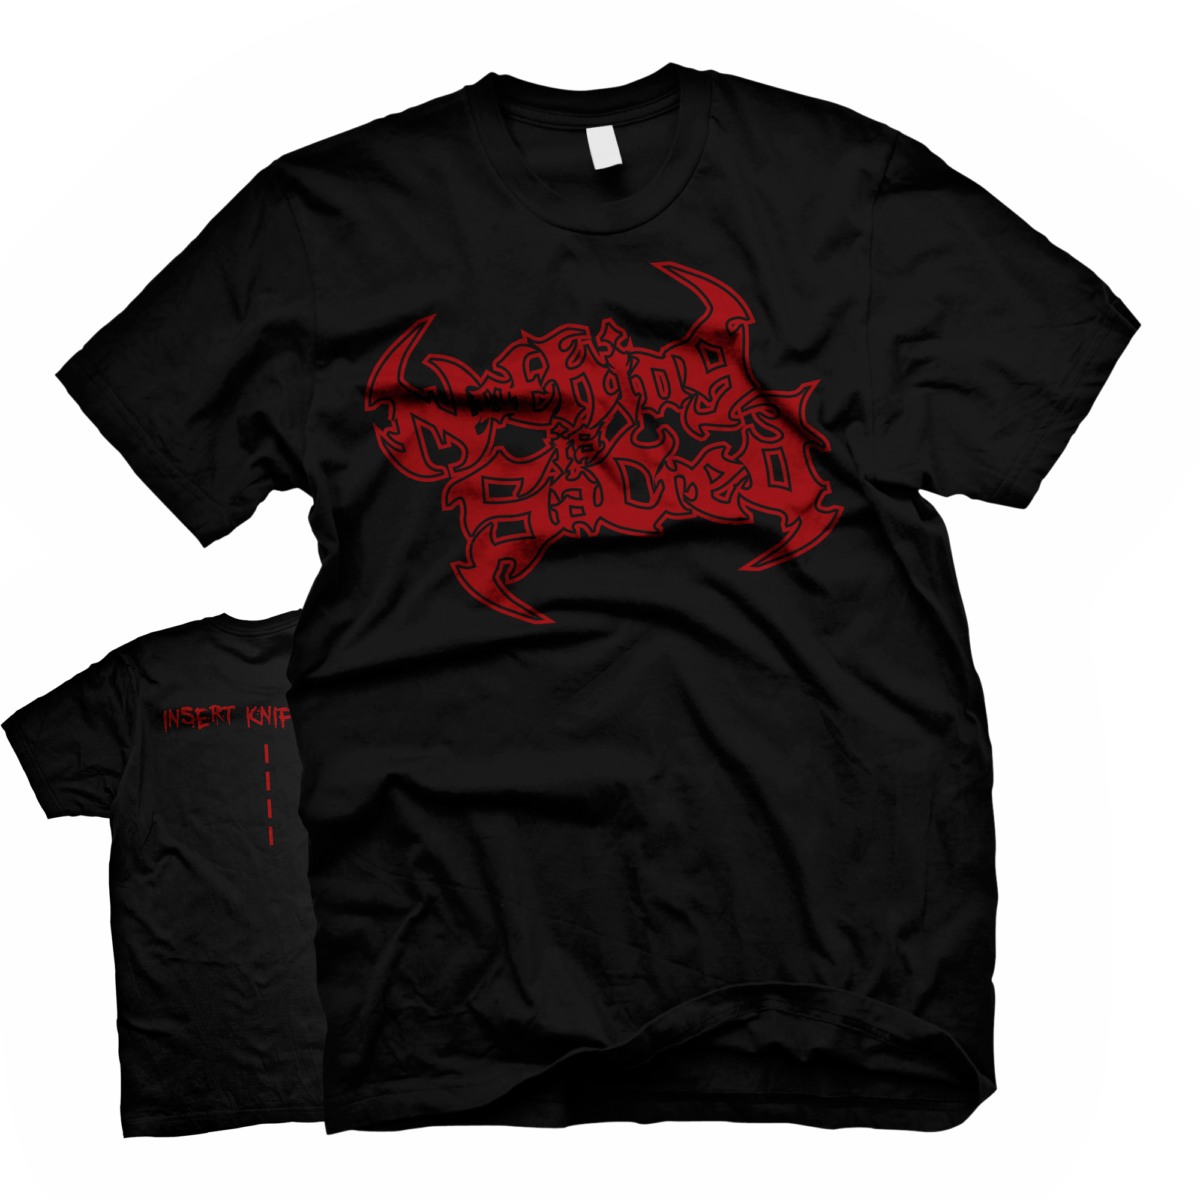 Nothing is Sacred - Backstabbers Shirt